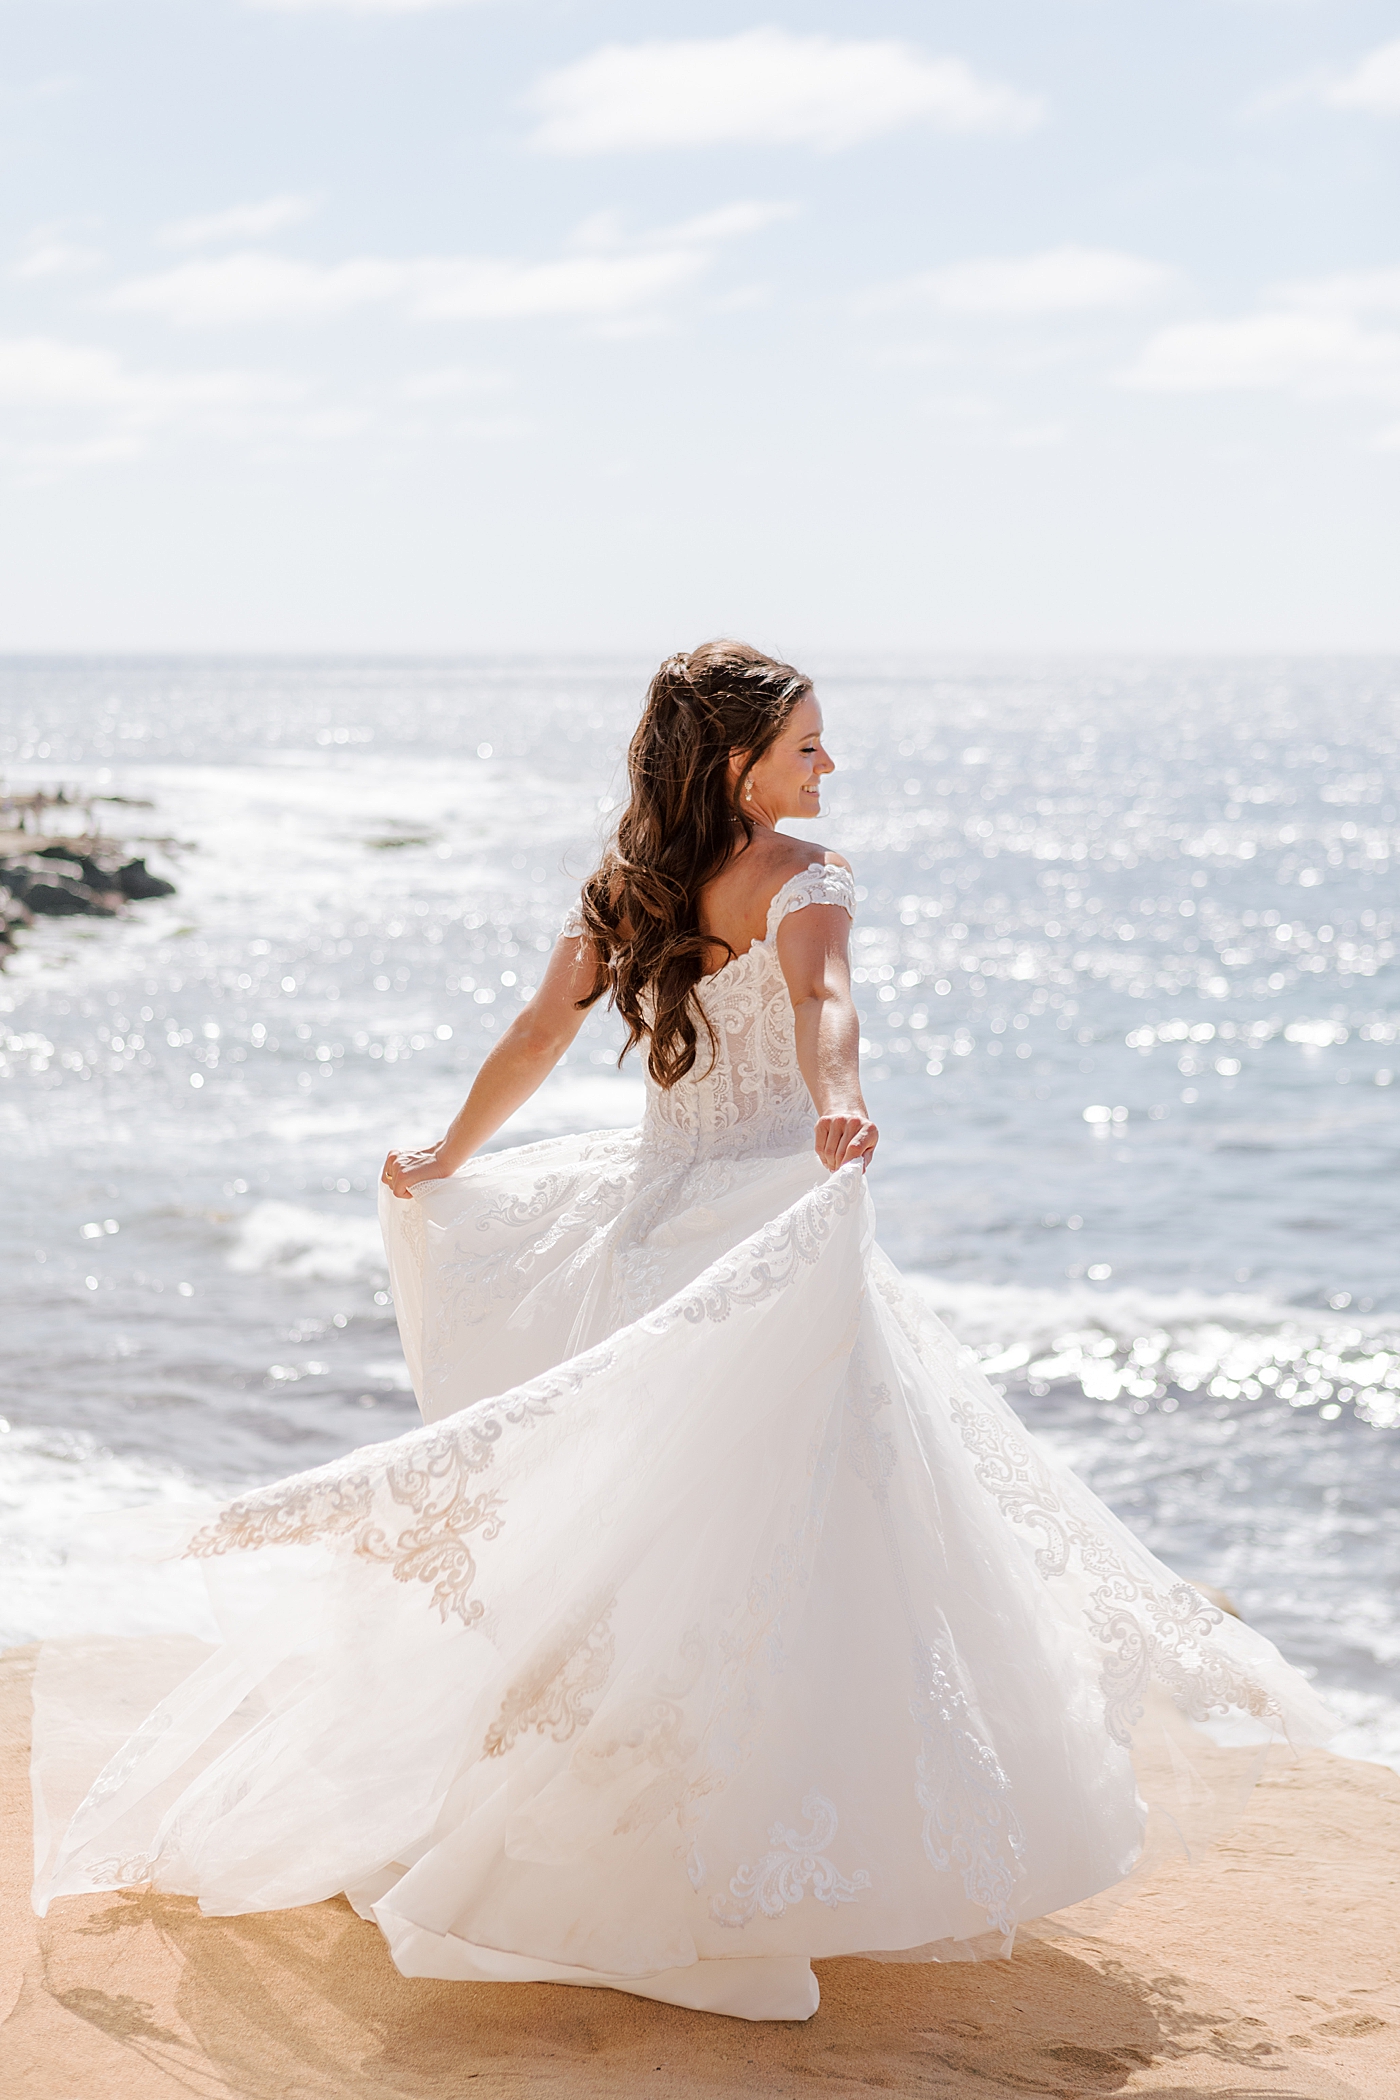 Bright photo of a bride ocean front looking at the camera while spinning in her dress | Image by Hope Helmuth Photography